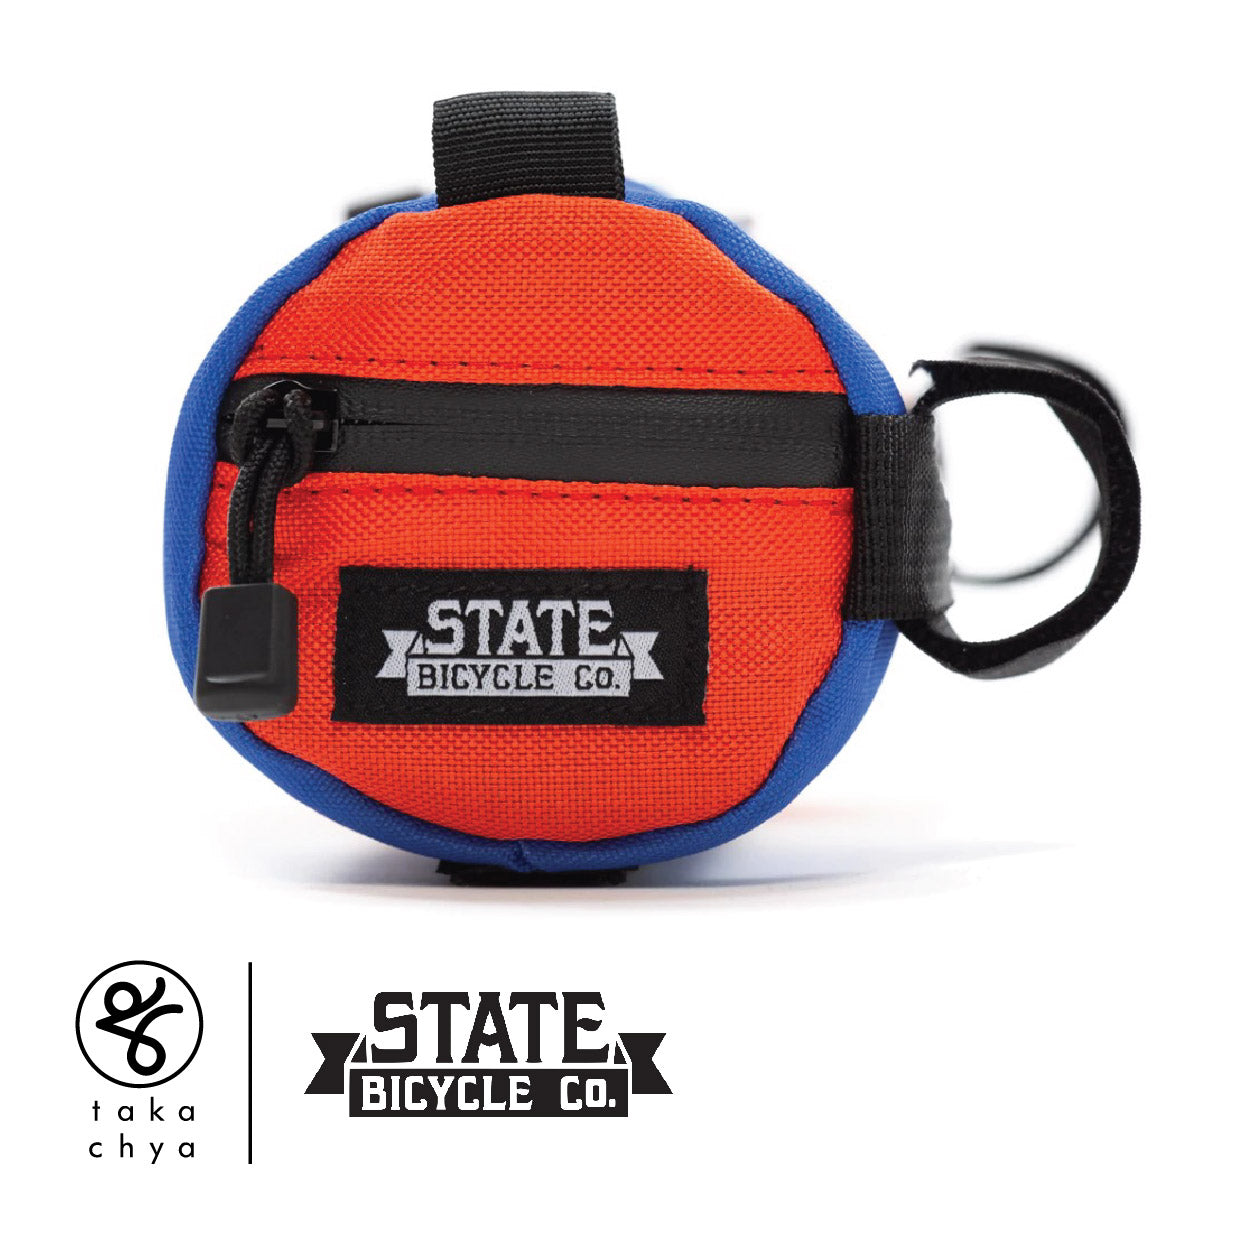 STATE BICYCLE CO. X THE GRATEFUL DEAD LIMITED EDITION - "LIGHTNING BOLT" ALL-ROAD BAR BAG